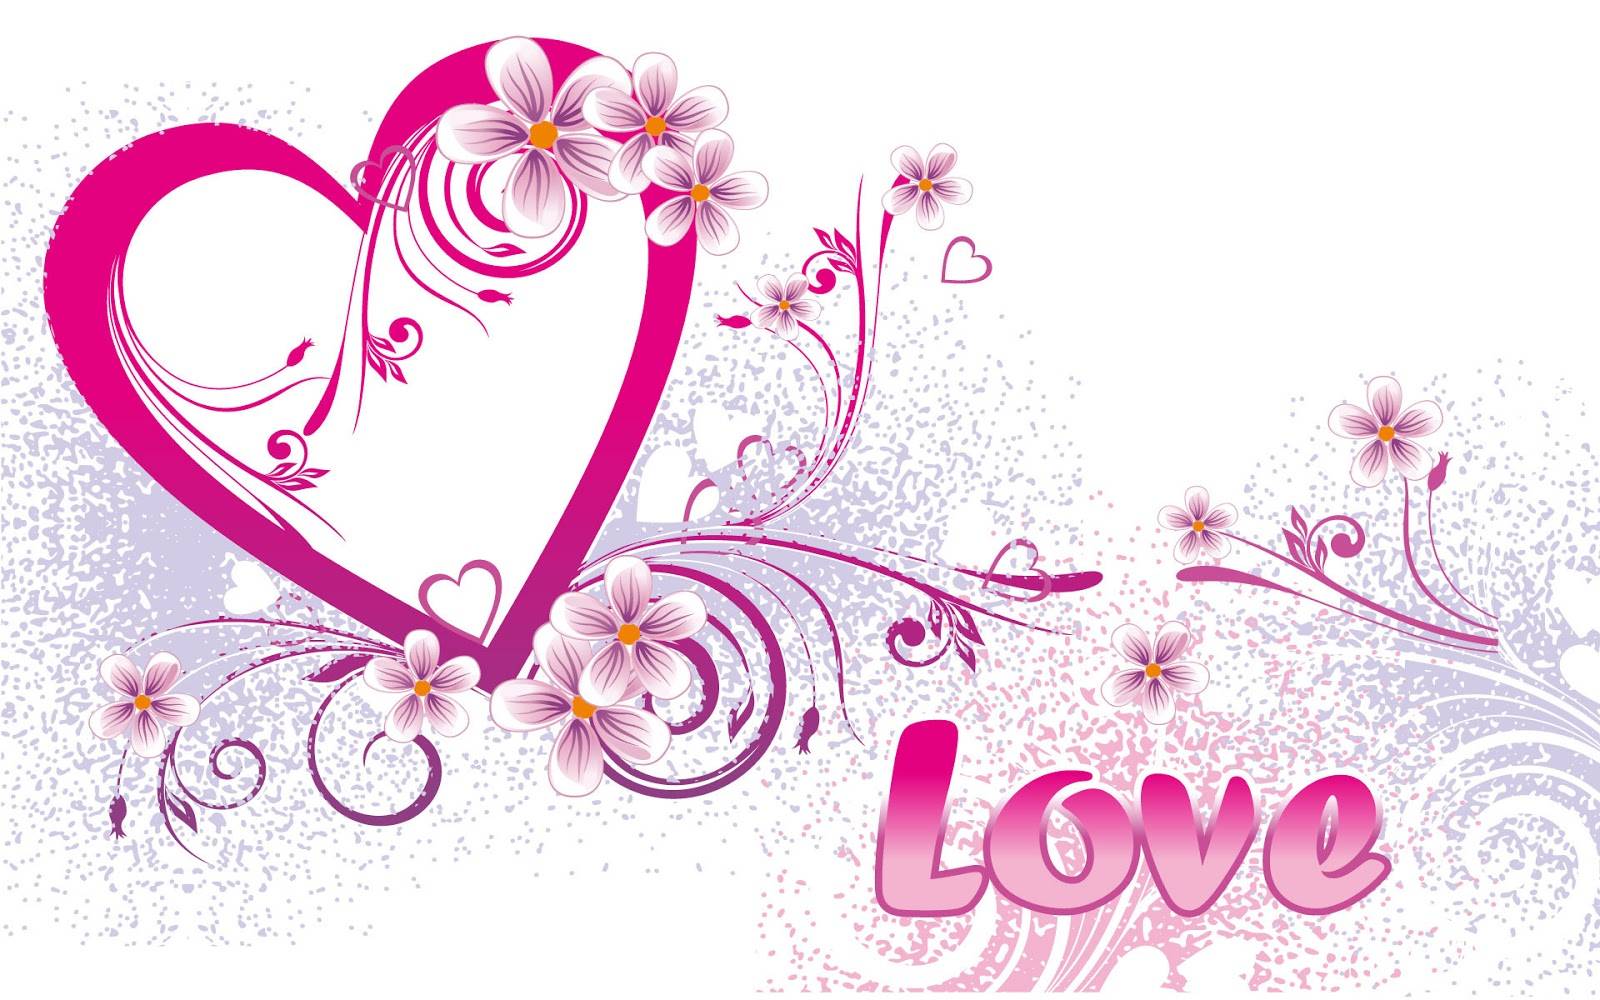 Expression Of Love Symbols Wallpaper Free Android Application